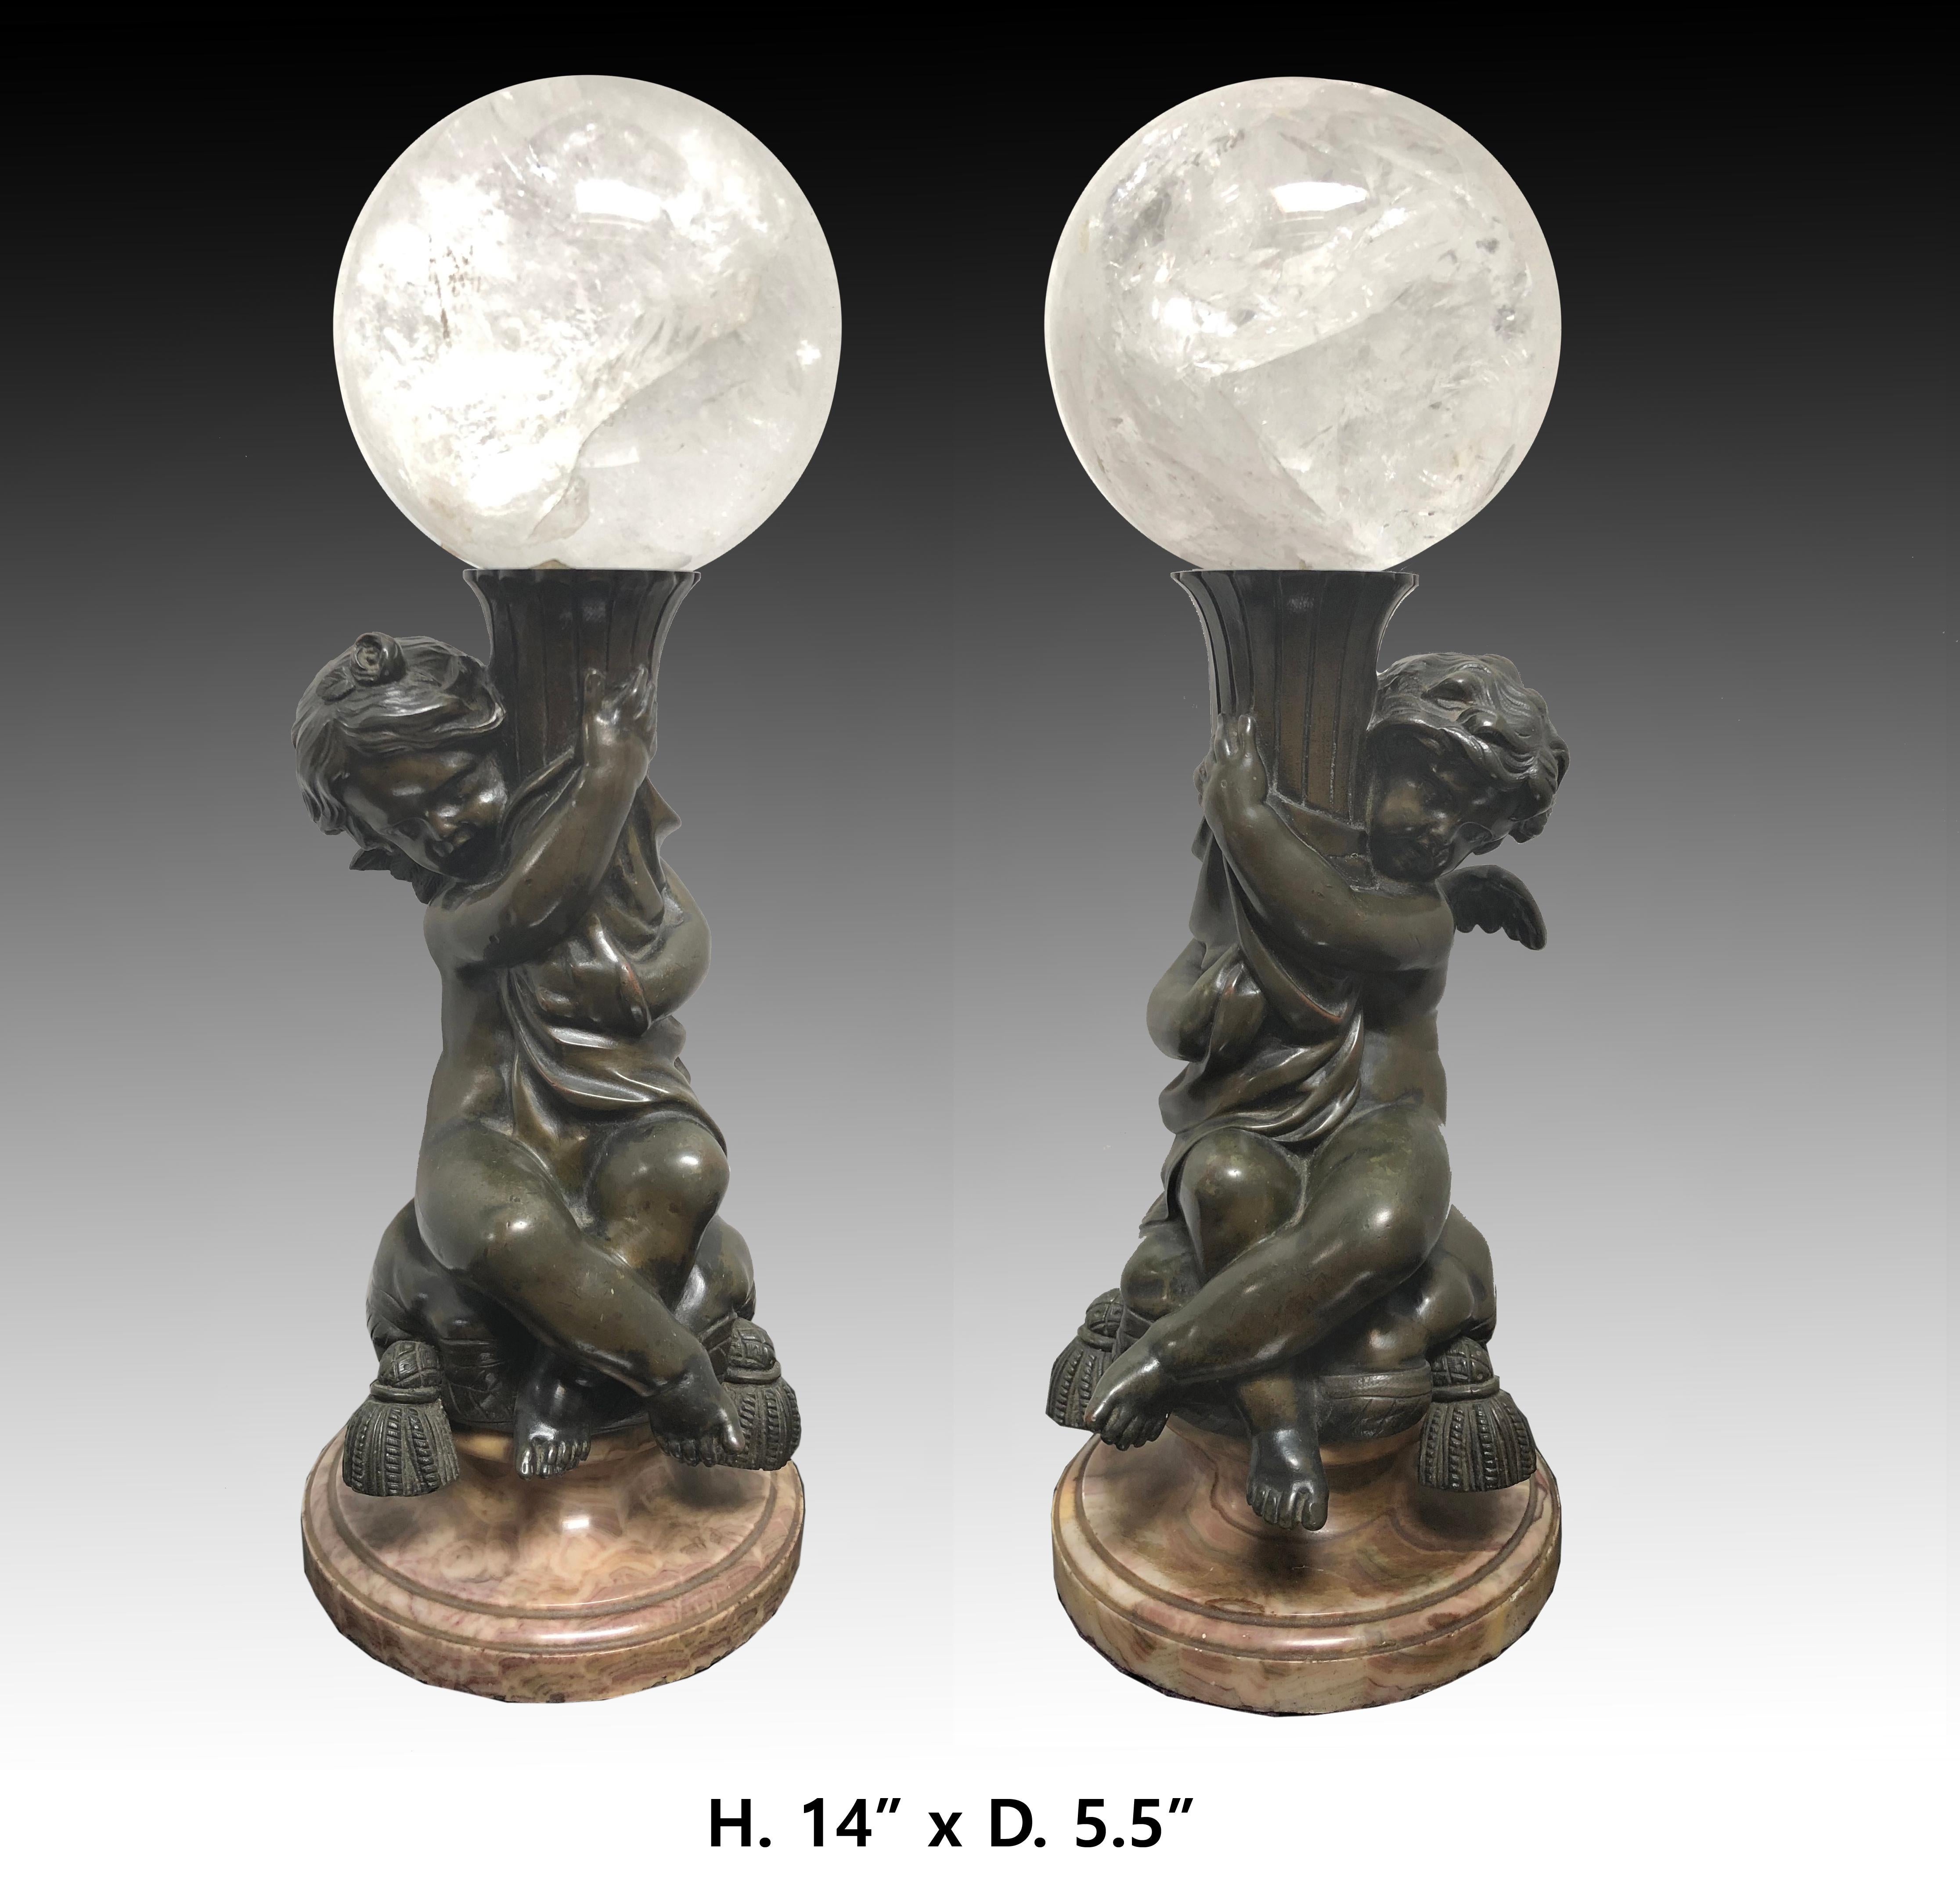 Impressive 19 century pair of bronze babies with rock crystal spheres..
Can be placed everywhere and make a big statement. 